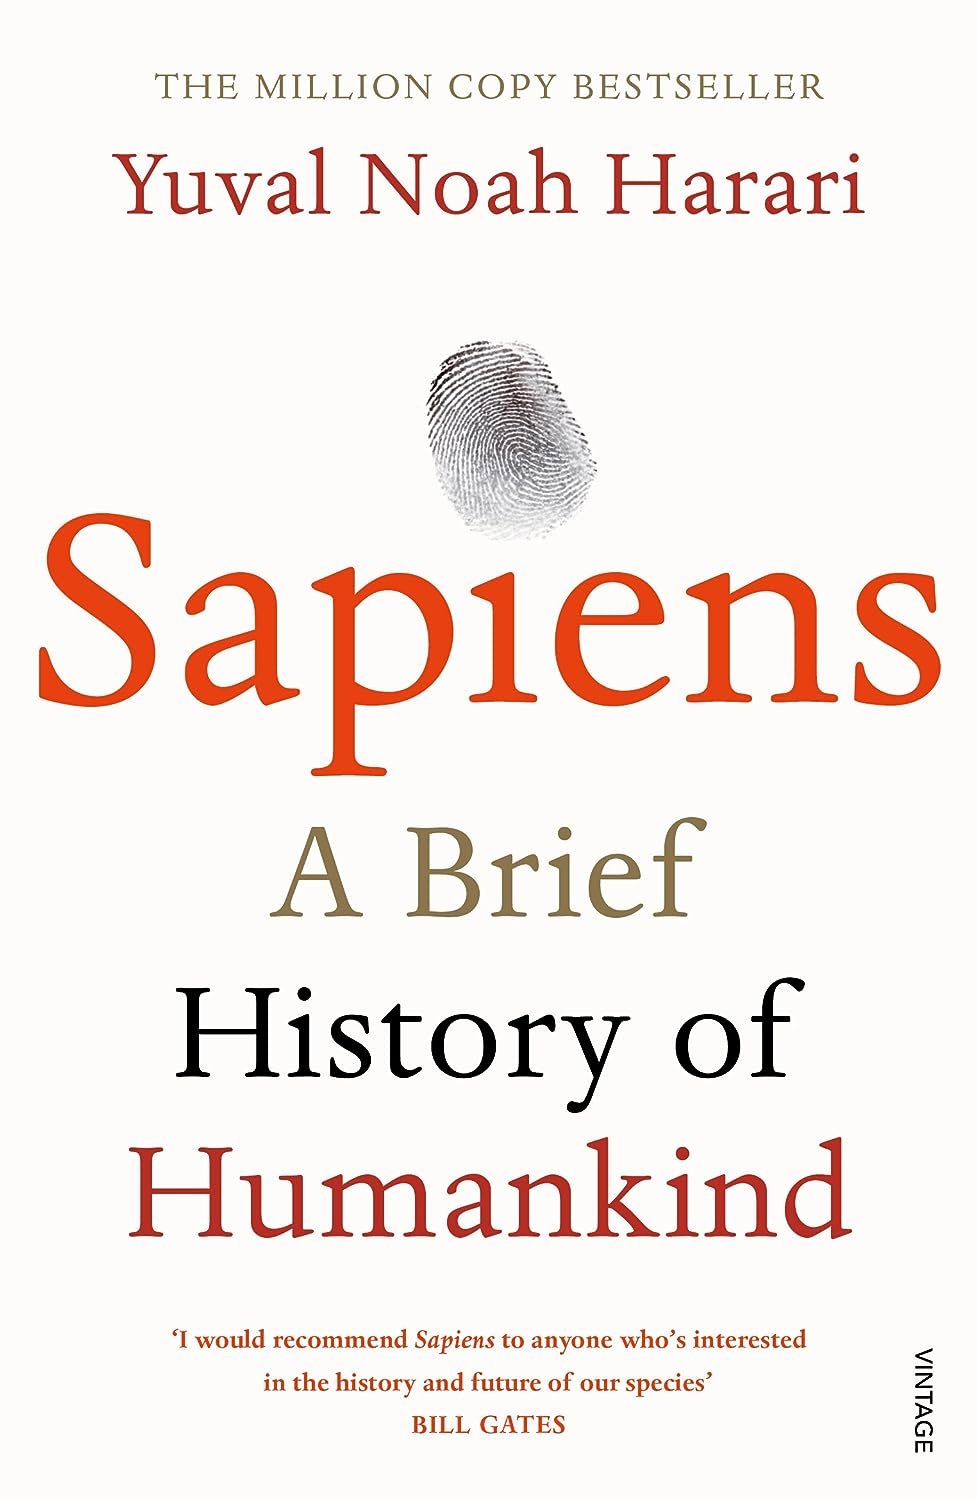 An image of the book Sapiens